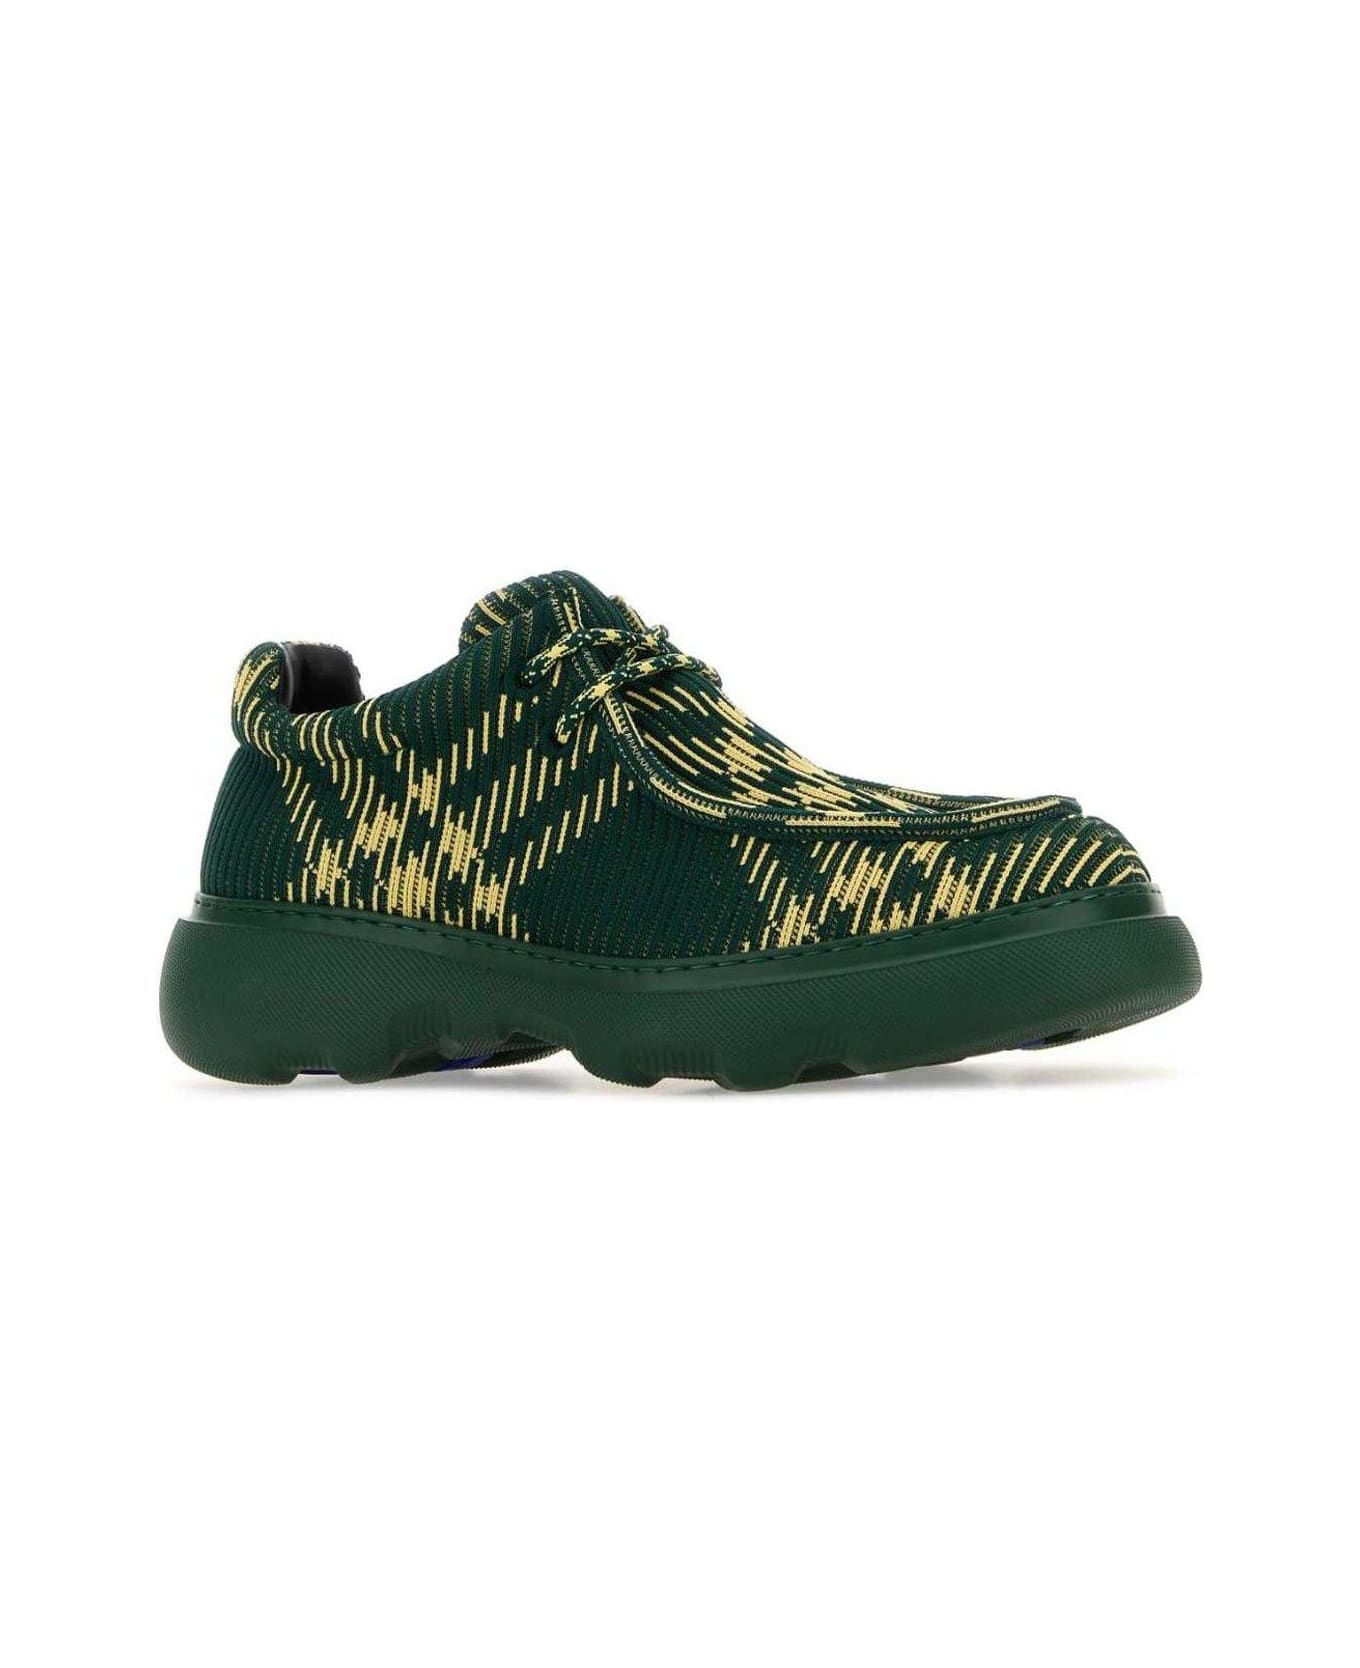 Burberry Ekd Check-printed Lace-up Derby Shoes - Primrose Ip Check